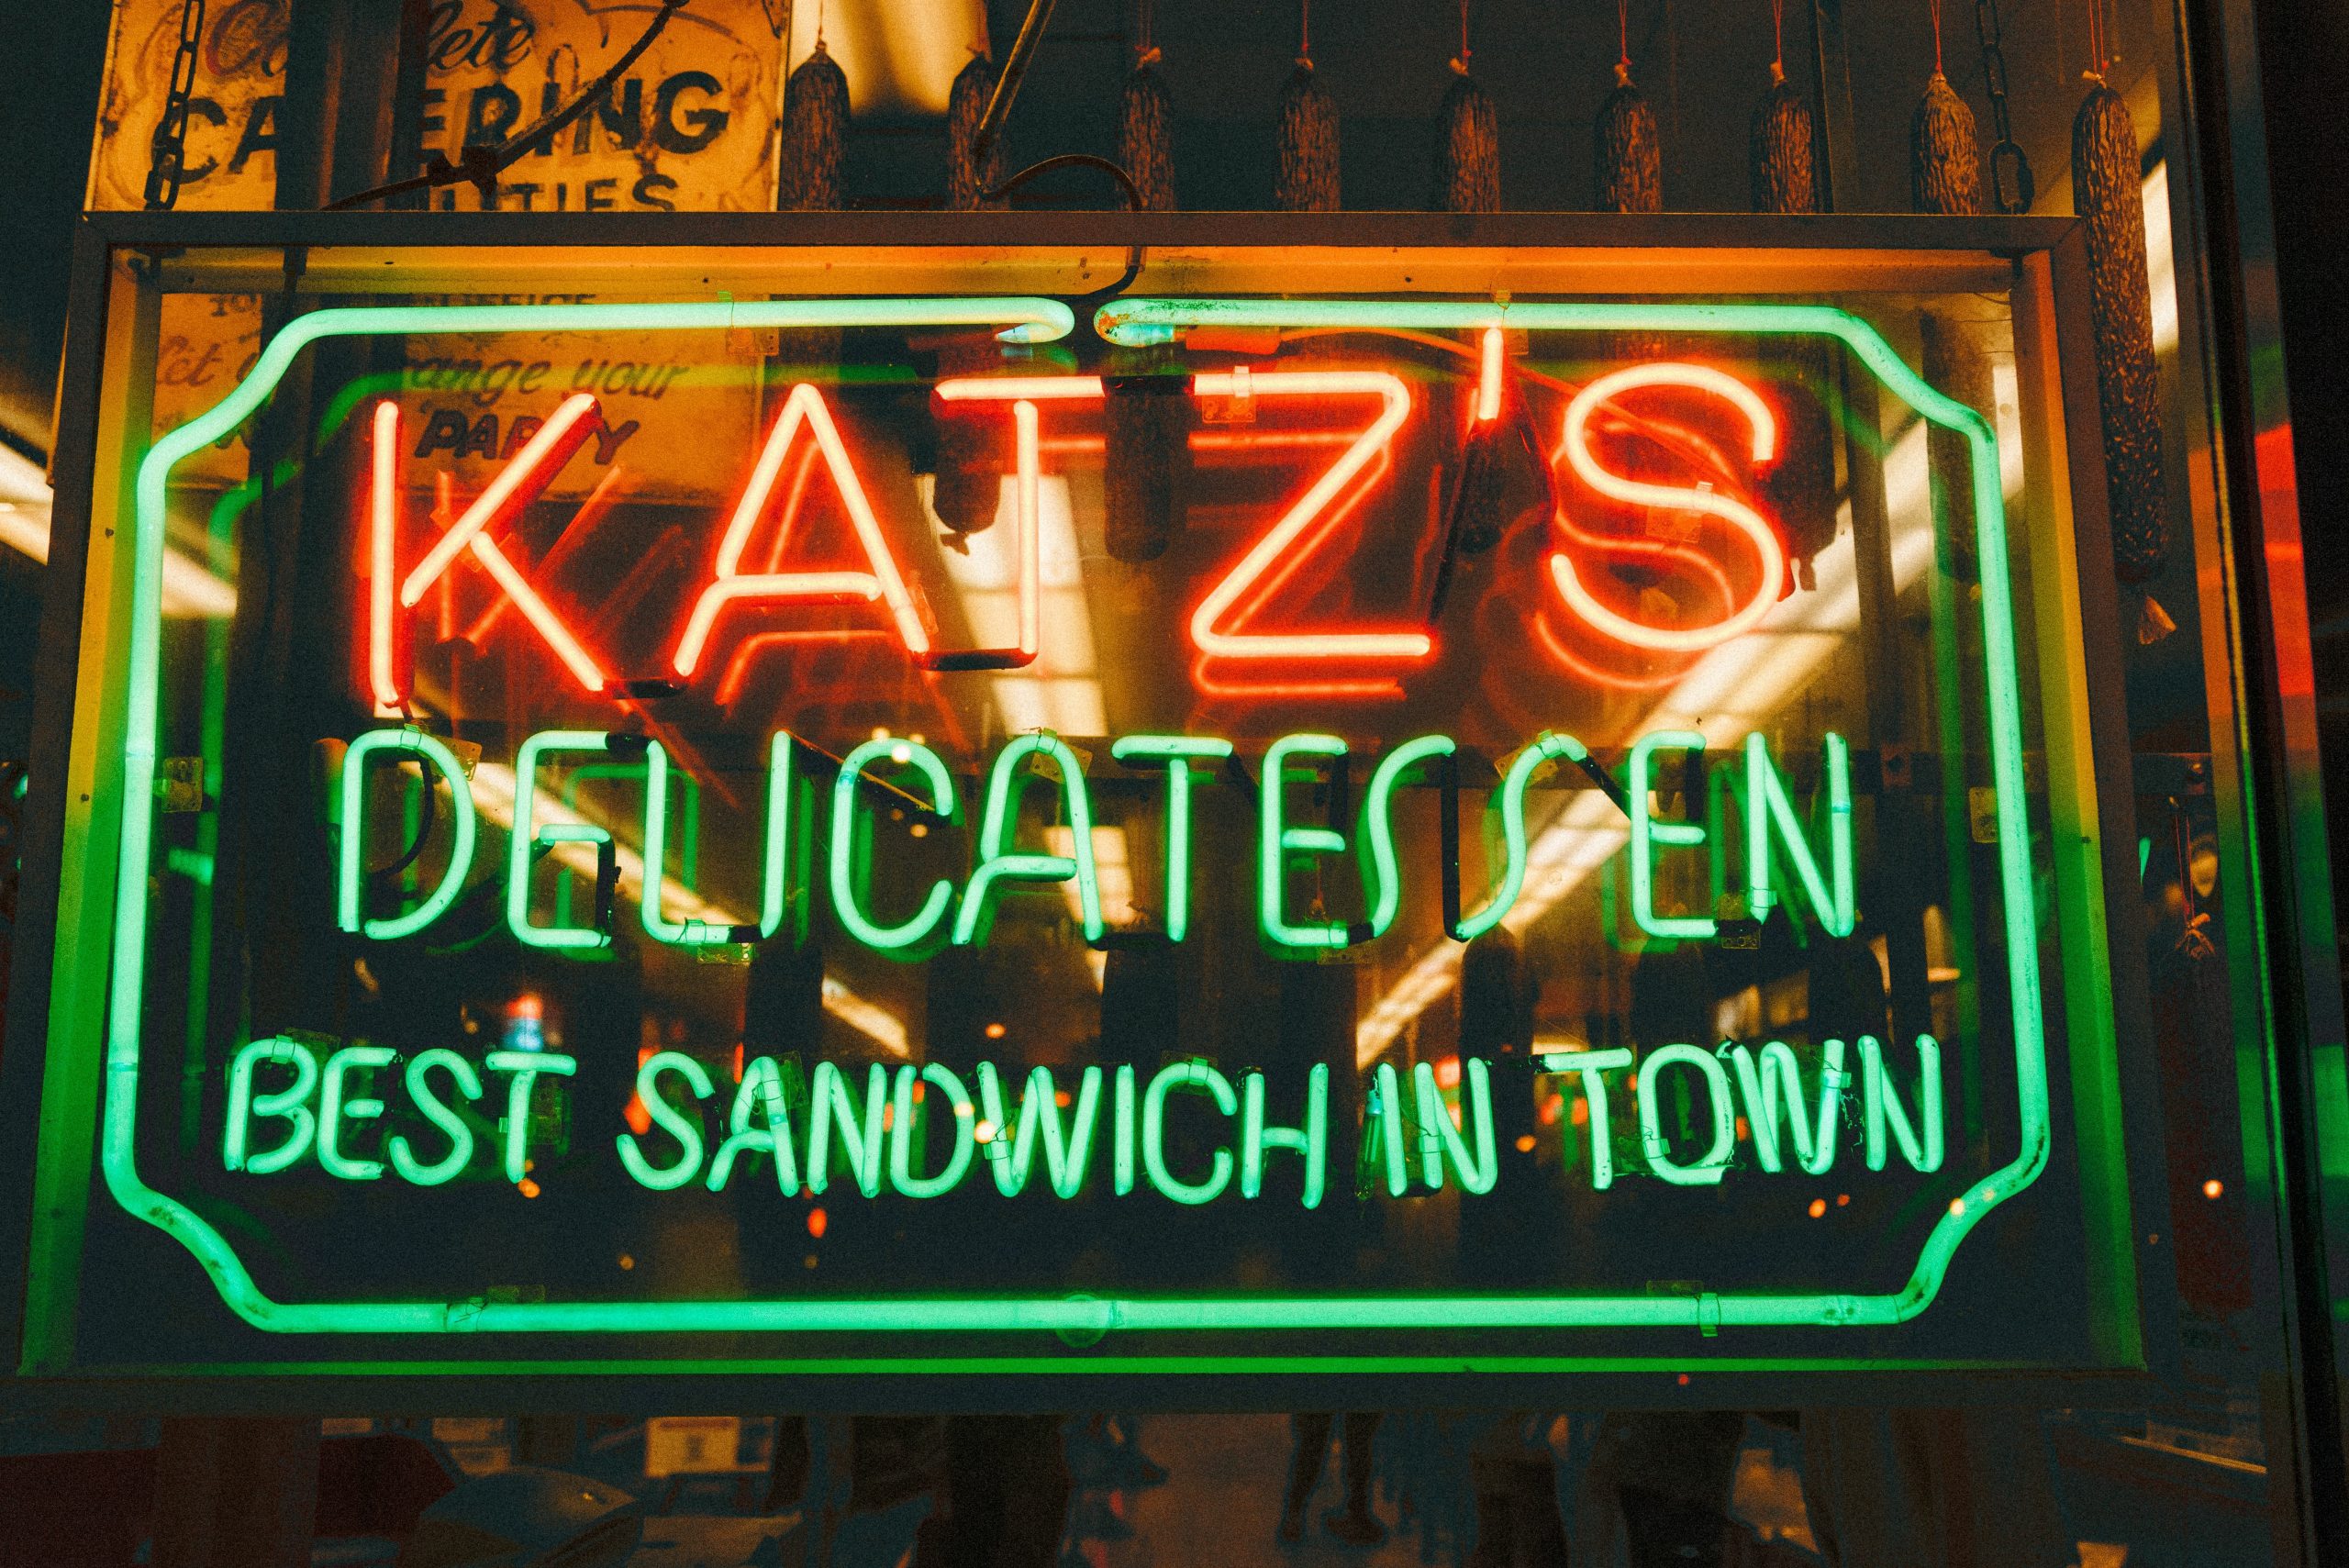 Find out more about Katz's Deli’s pastrami from ‘When Harry Met Sally’